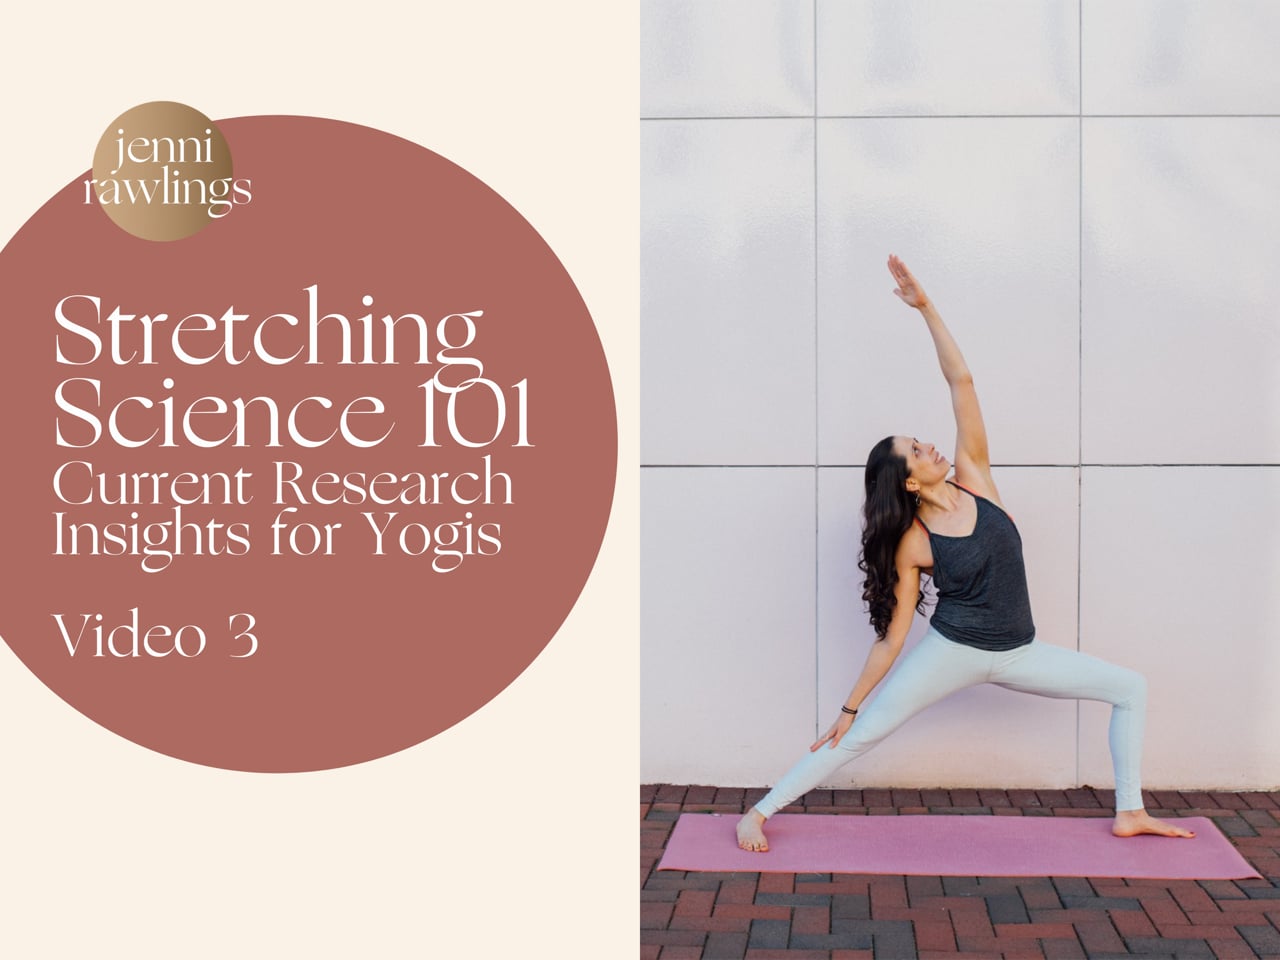 Video 3 – Stretching Science 101